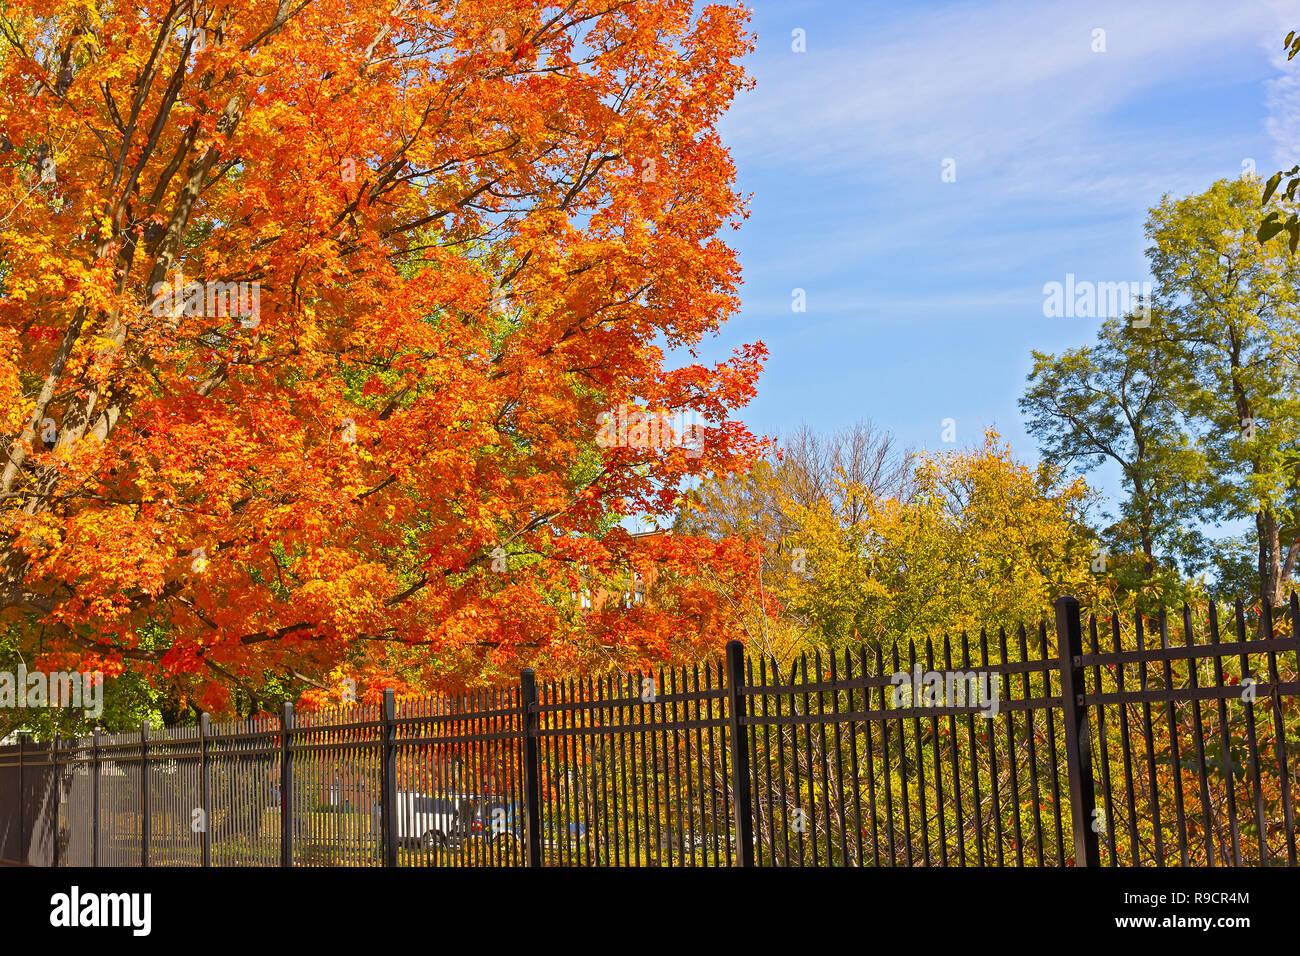 Autumn in the city, Washington DC, USA. Maple tree in its colorful glory of orange hues. Stock Photo